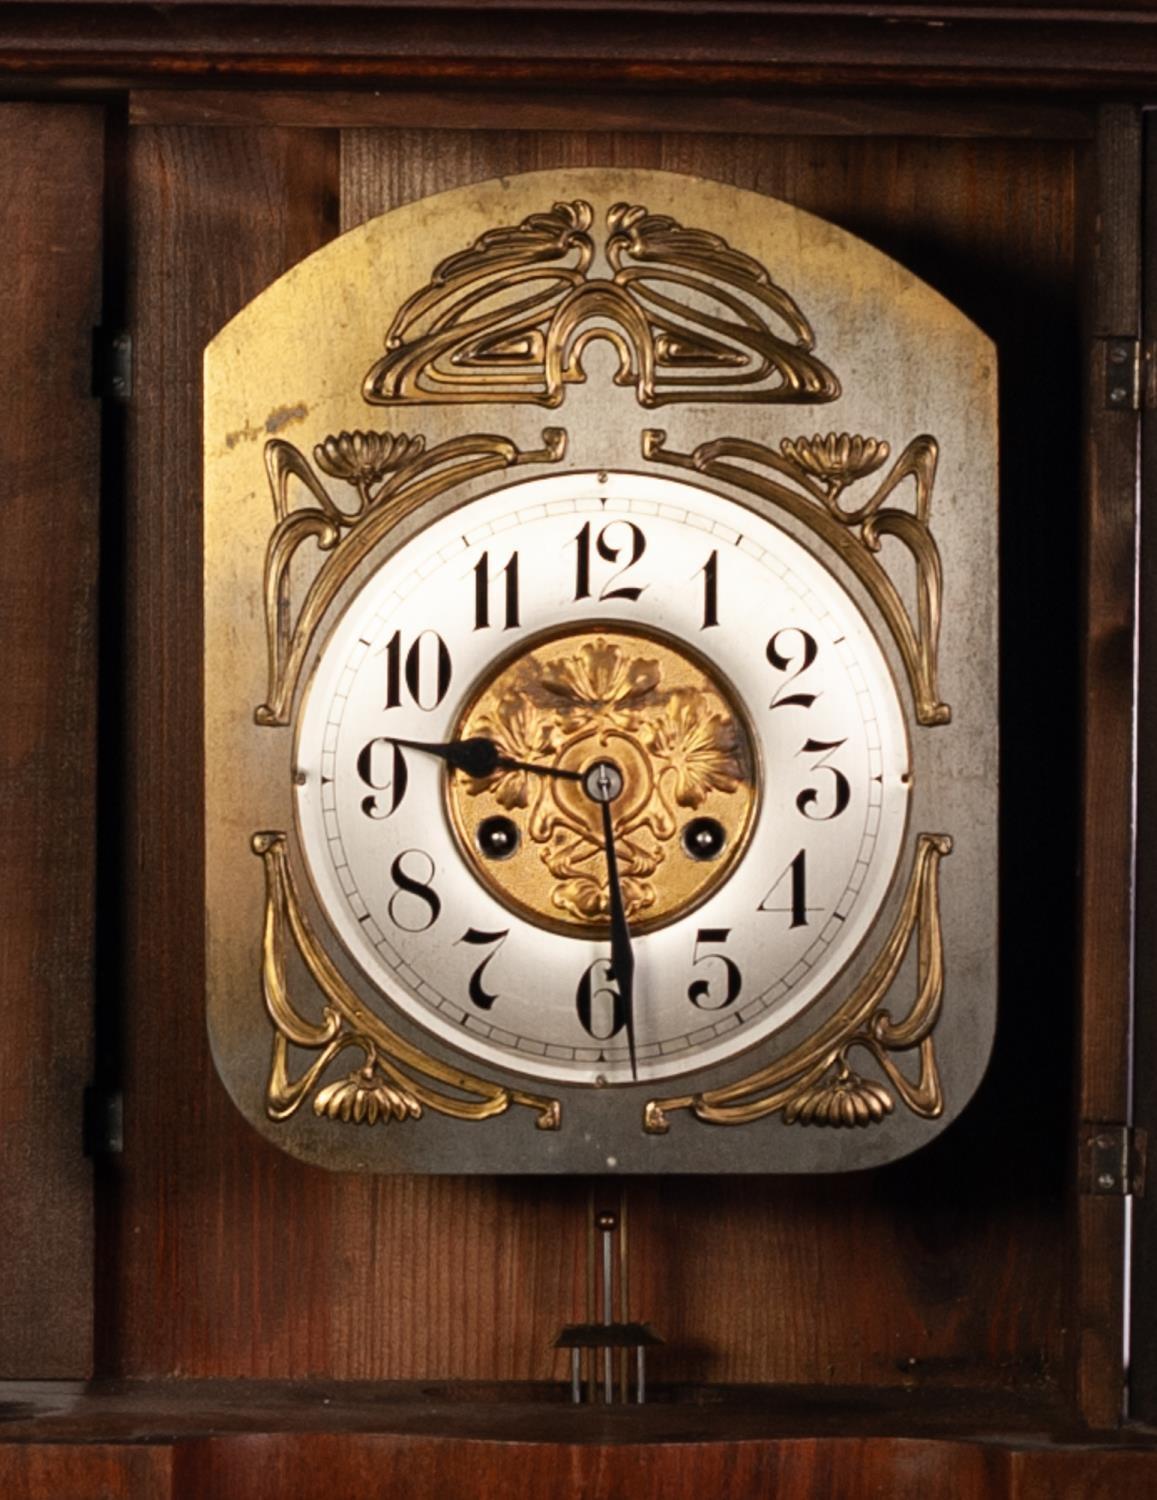 LATE 19th/EARLY 20th CENTURY GERMAN WALNUT WALL CLOCK, the pendulum movement striking on a coiled - Image 2 of 2